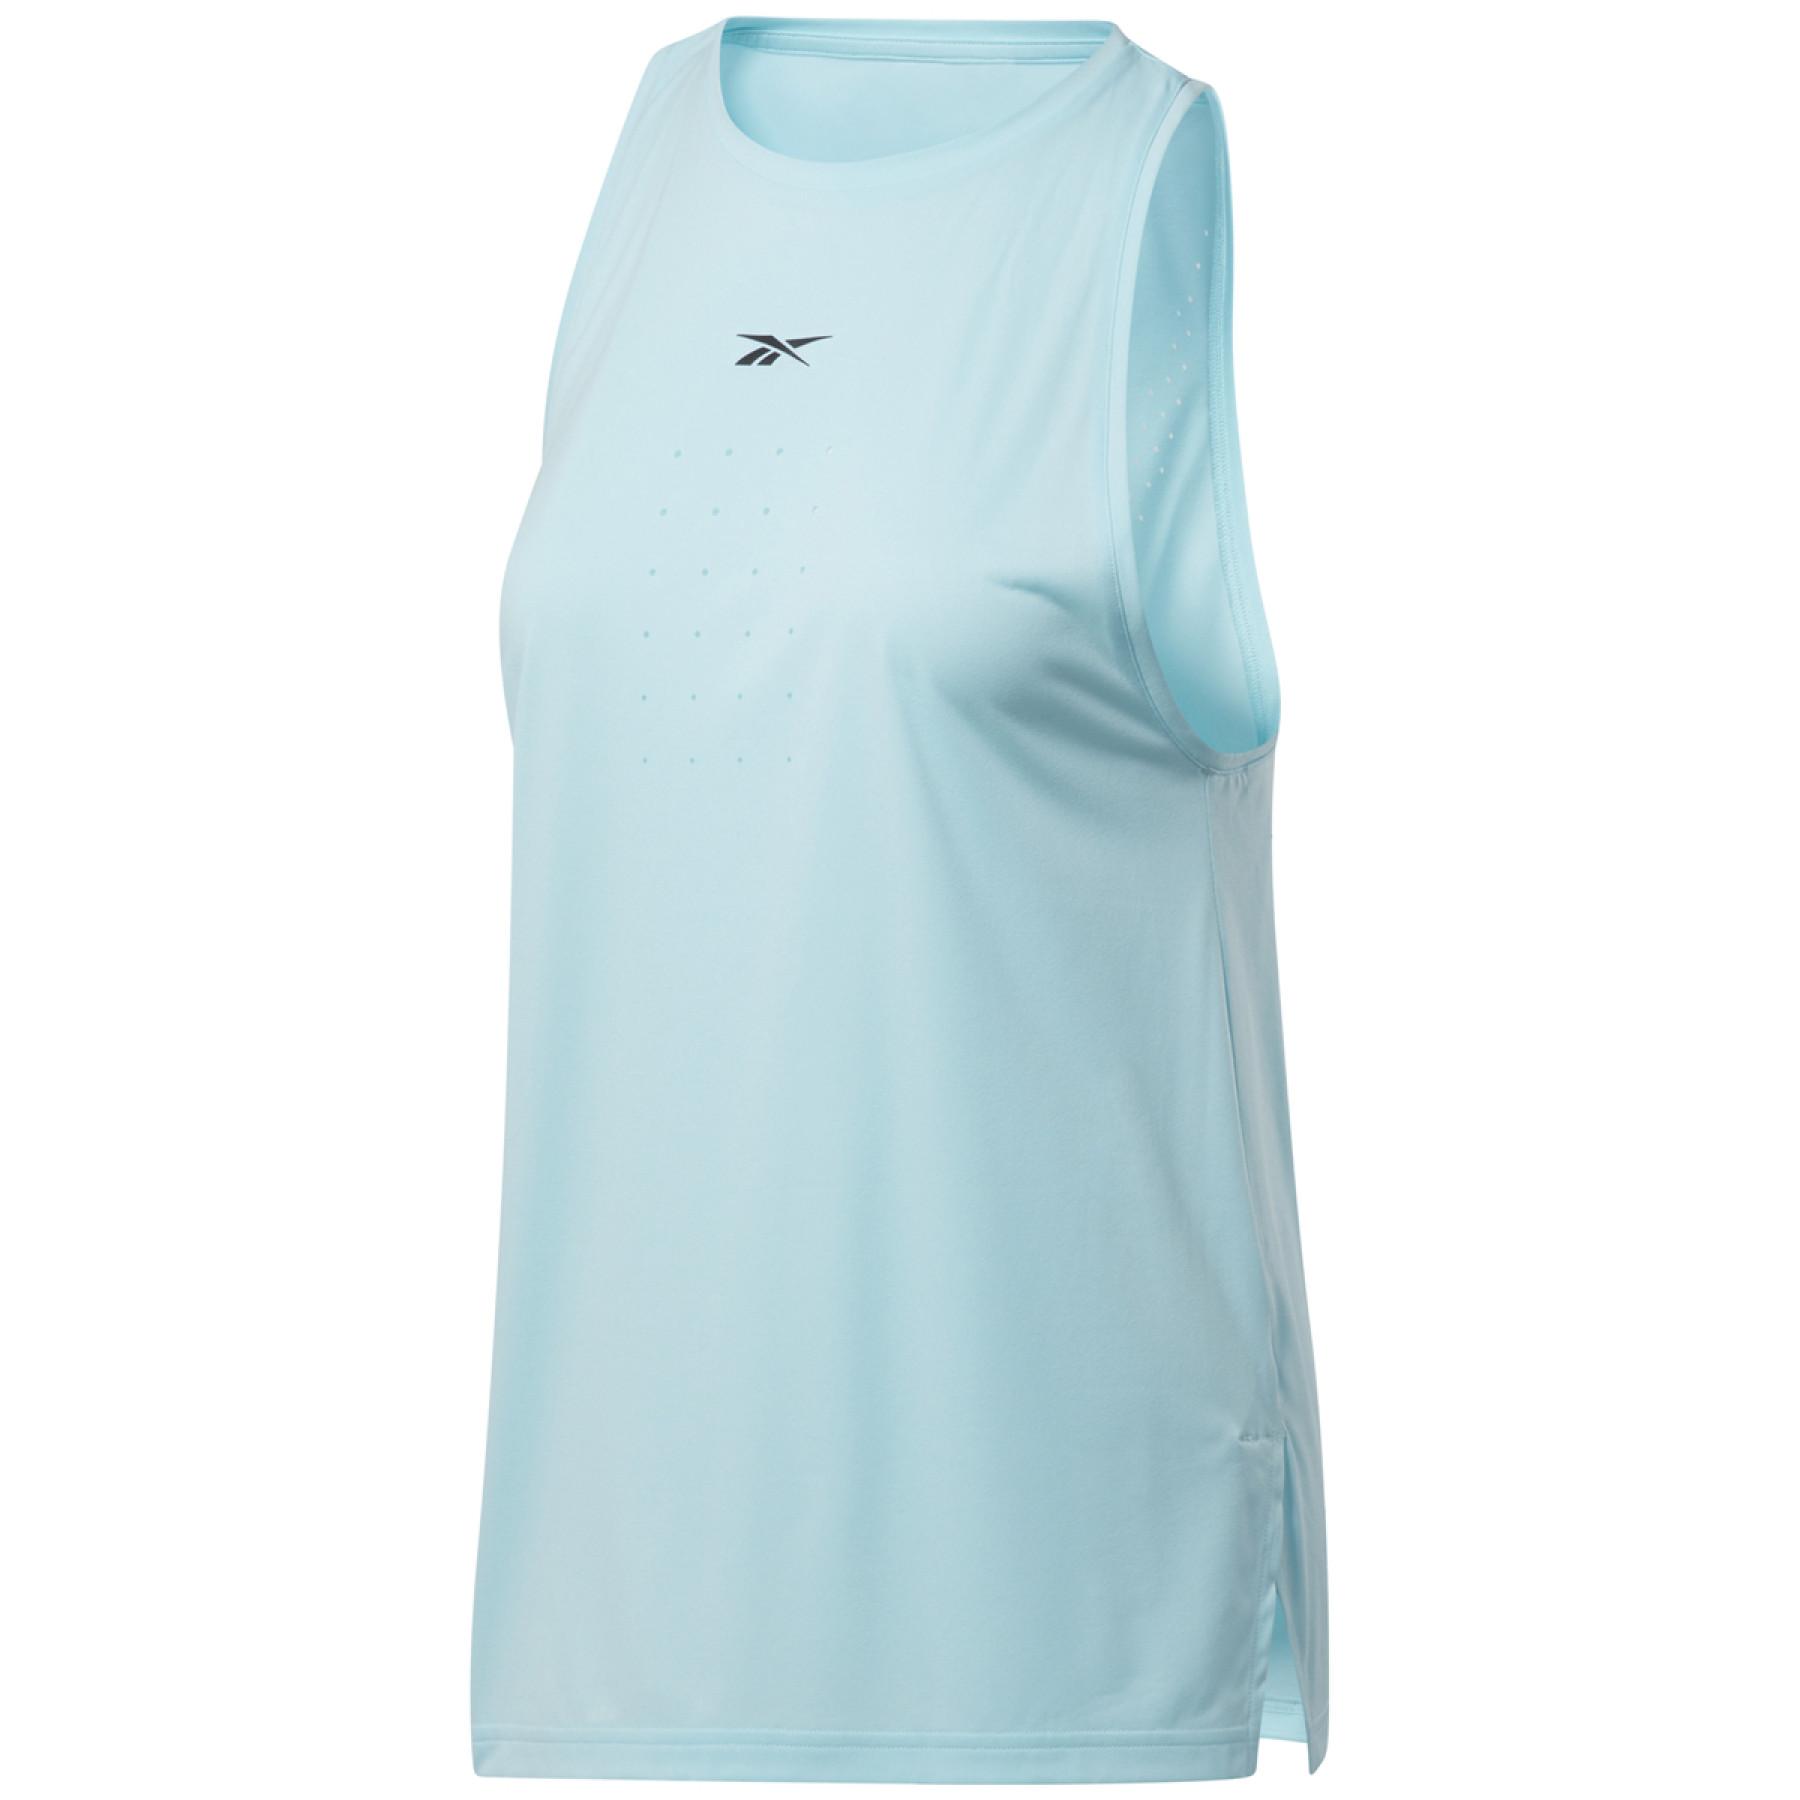 Canotta da donna Reebok United By Fitness Perforated